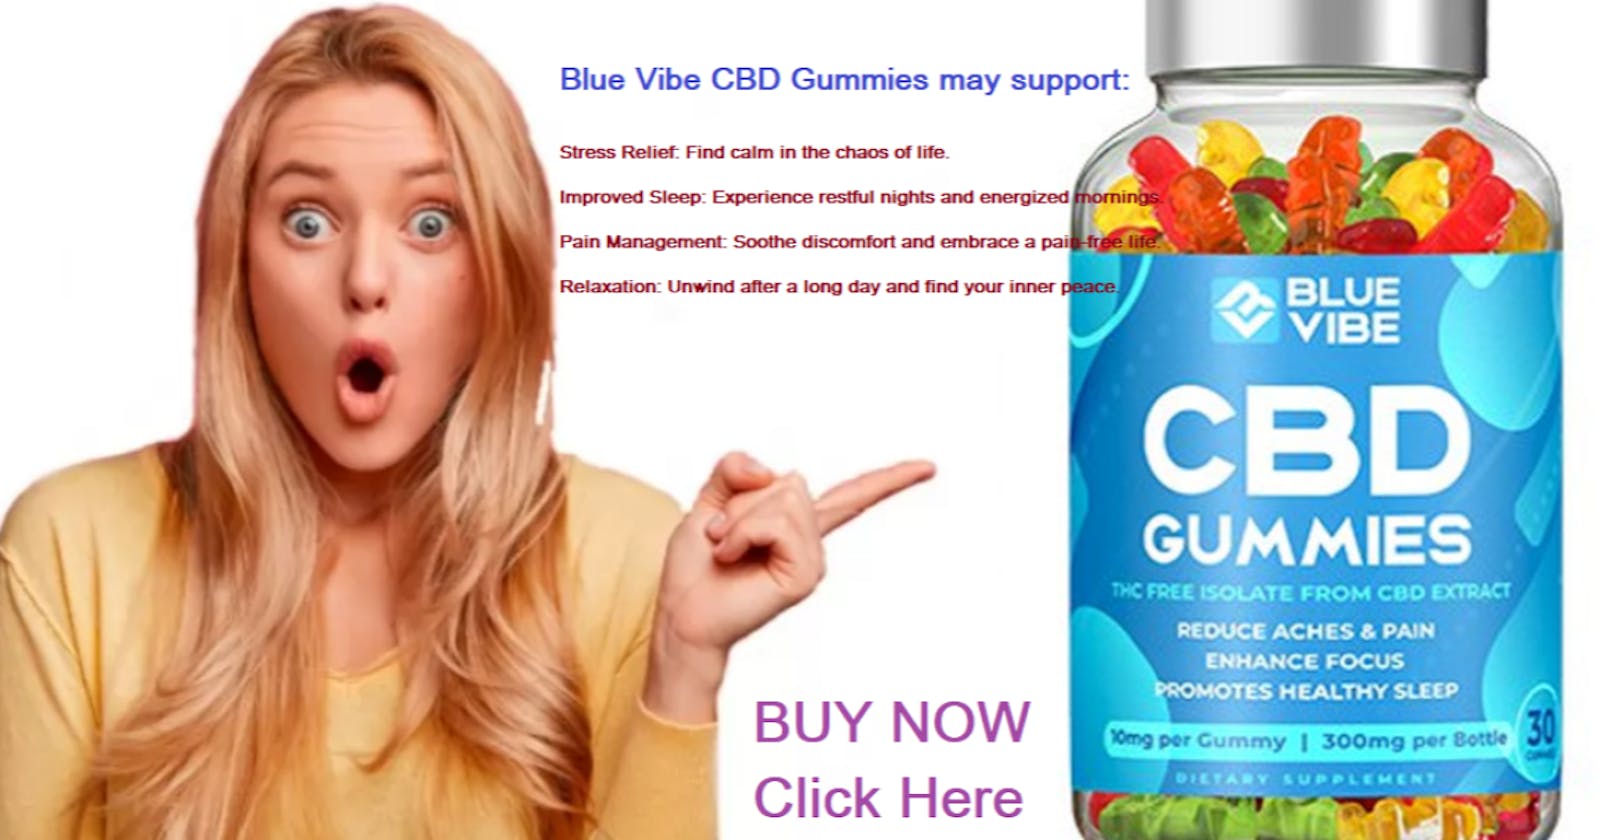 Blue Vibe CBD Gummies- Is Official Website Claims Fake Or Real!